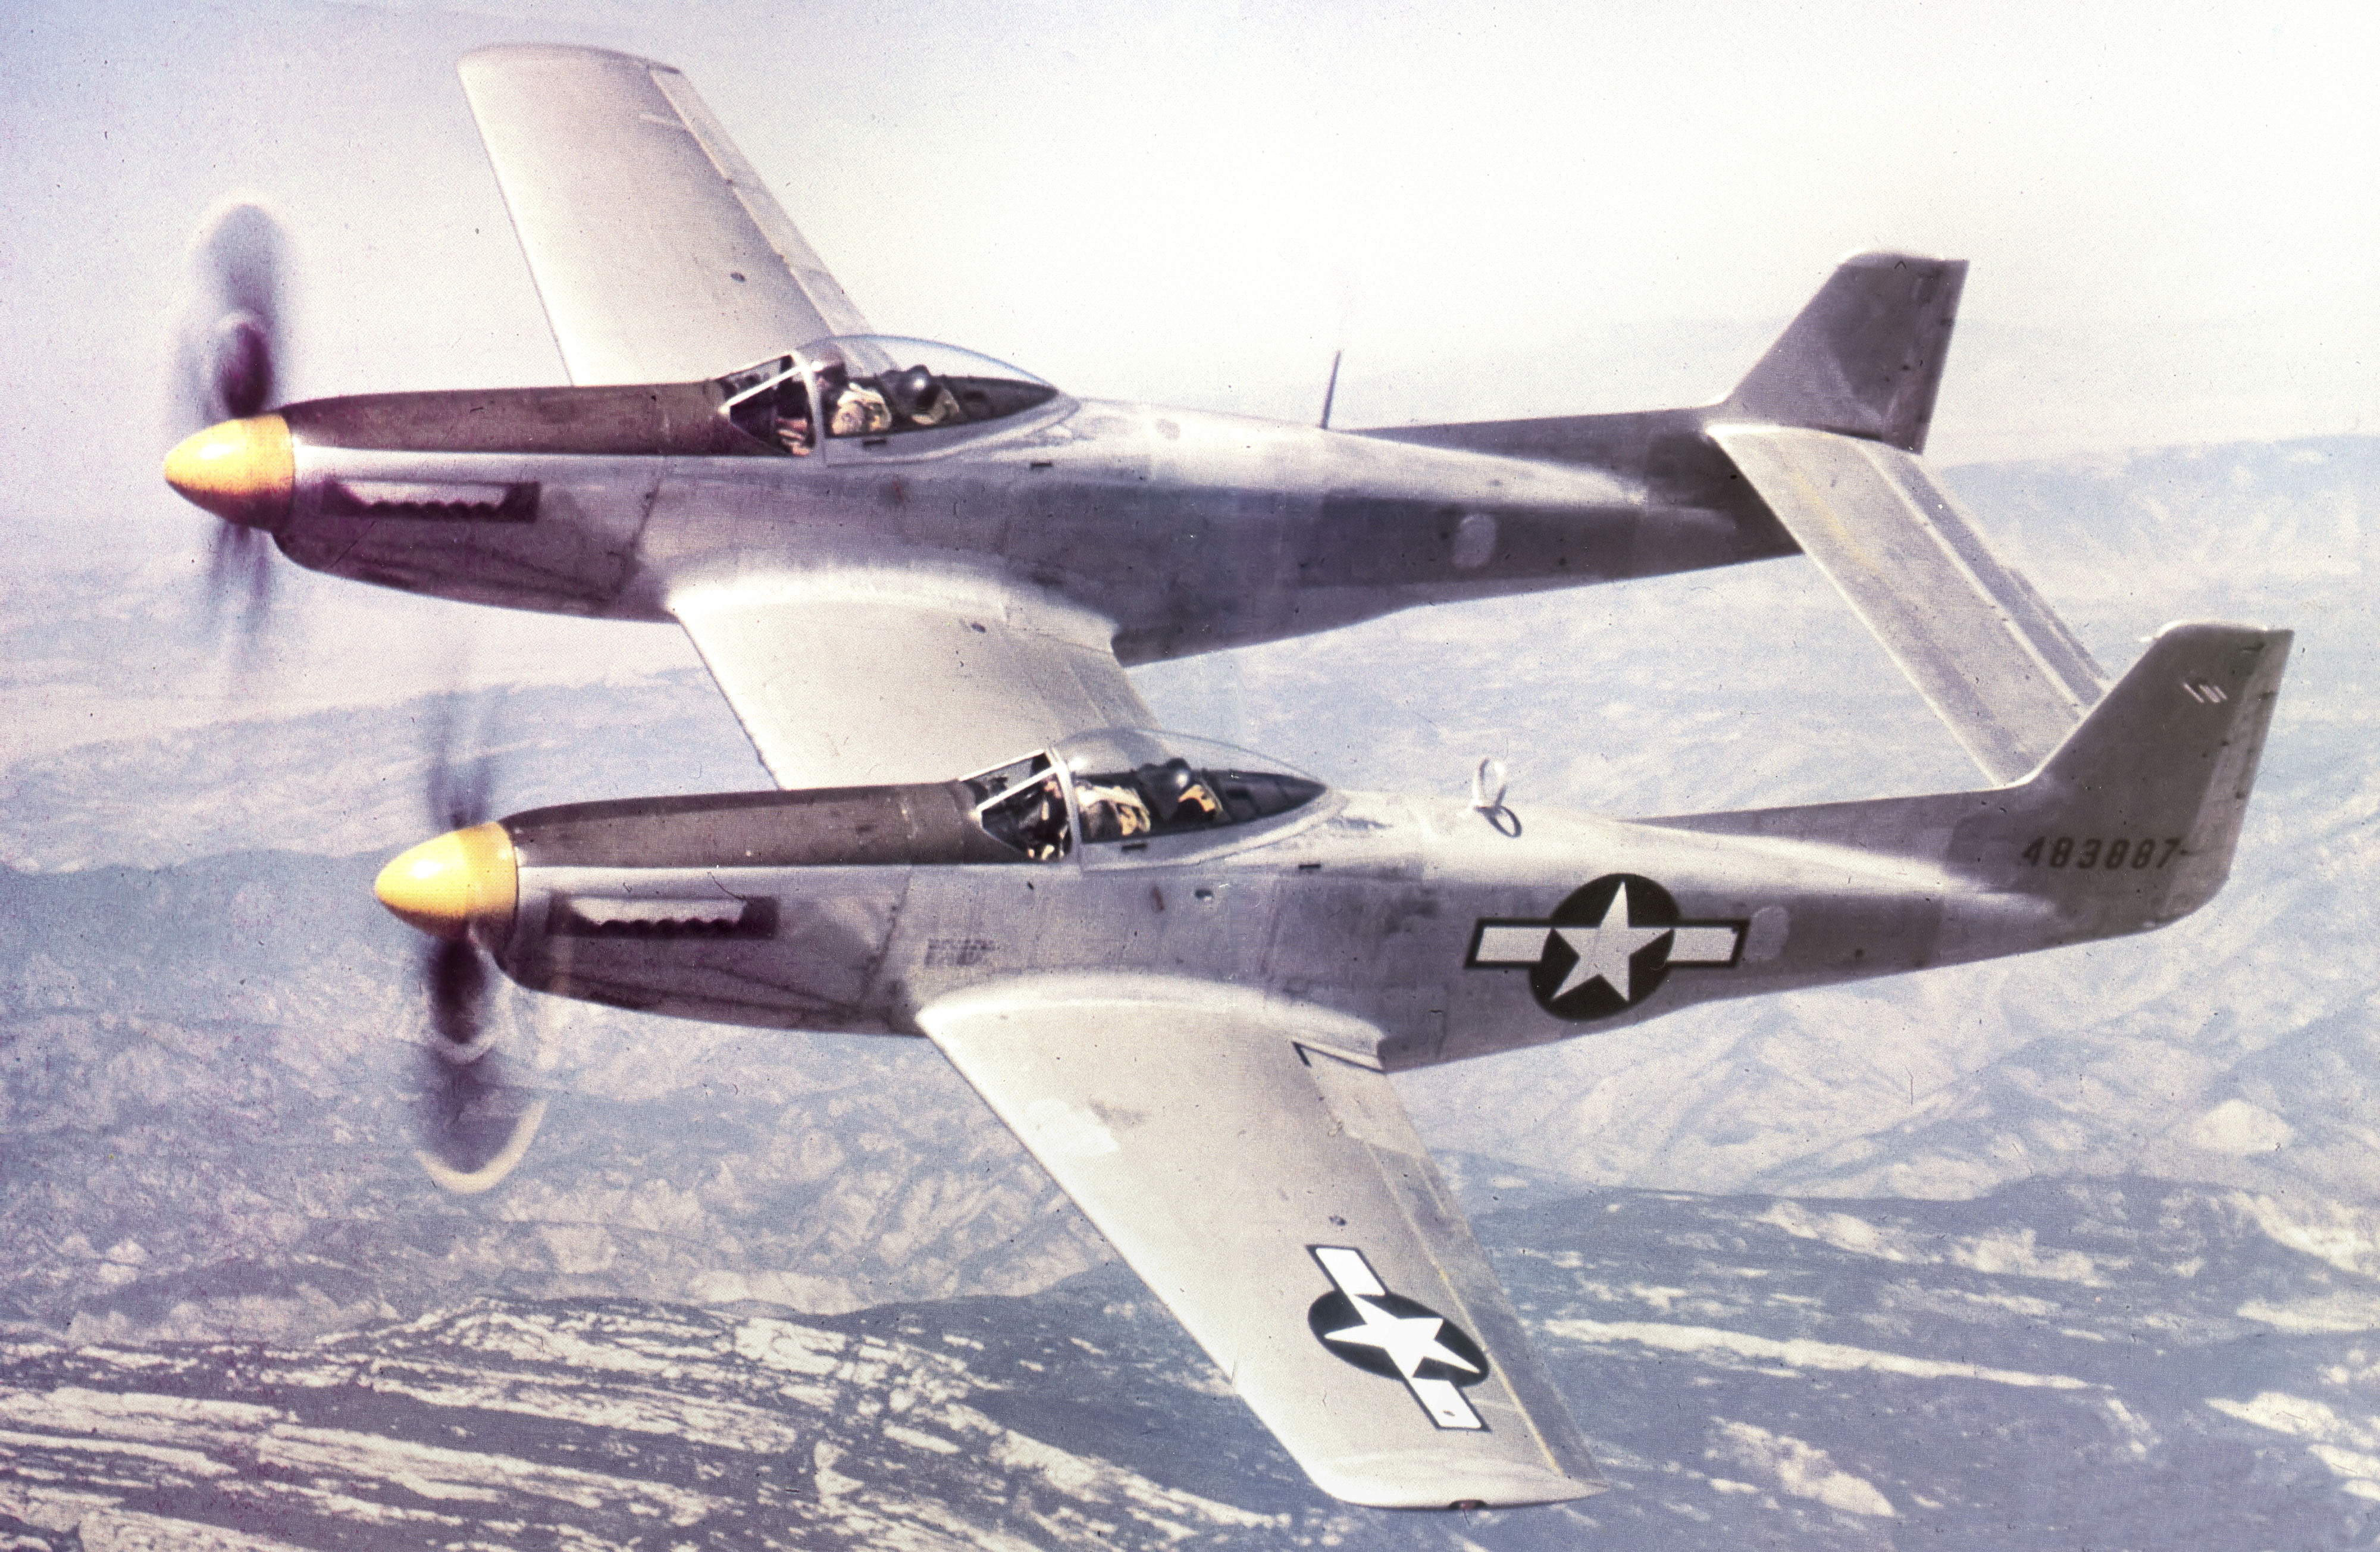 North American XP-82 Twin Mustang 44-83887 on a test flight over the Sierras in 1945.